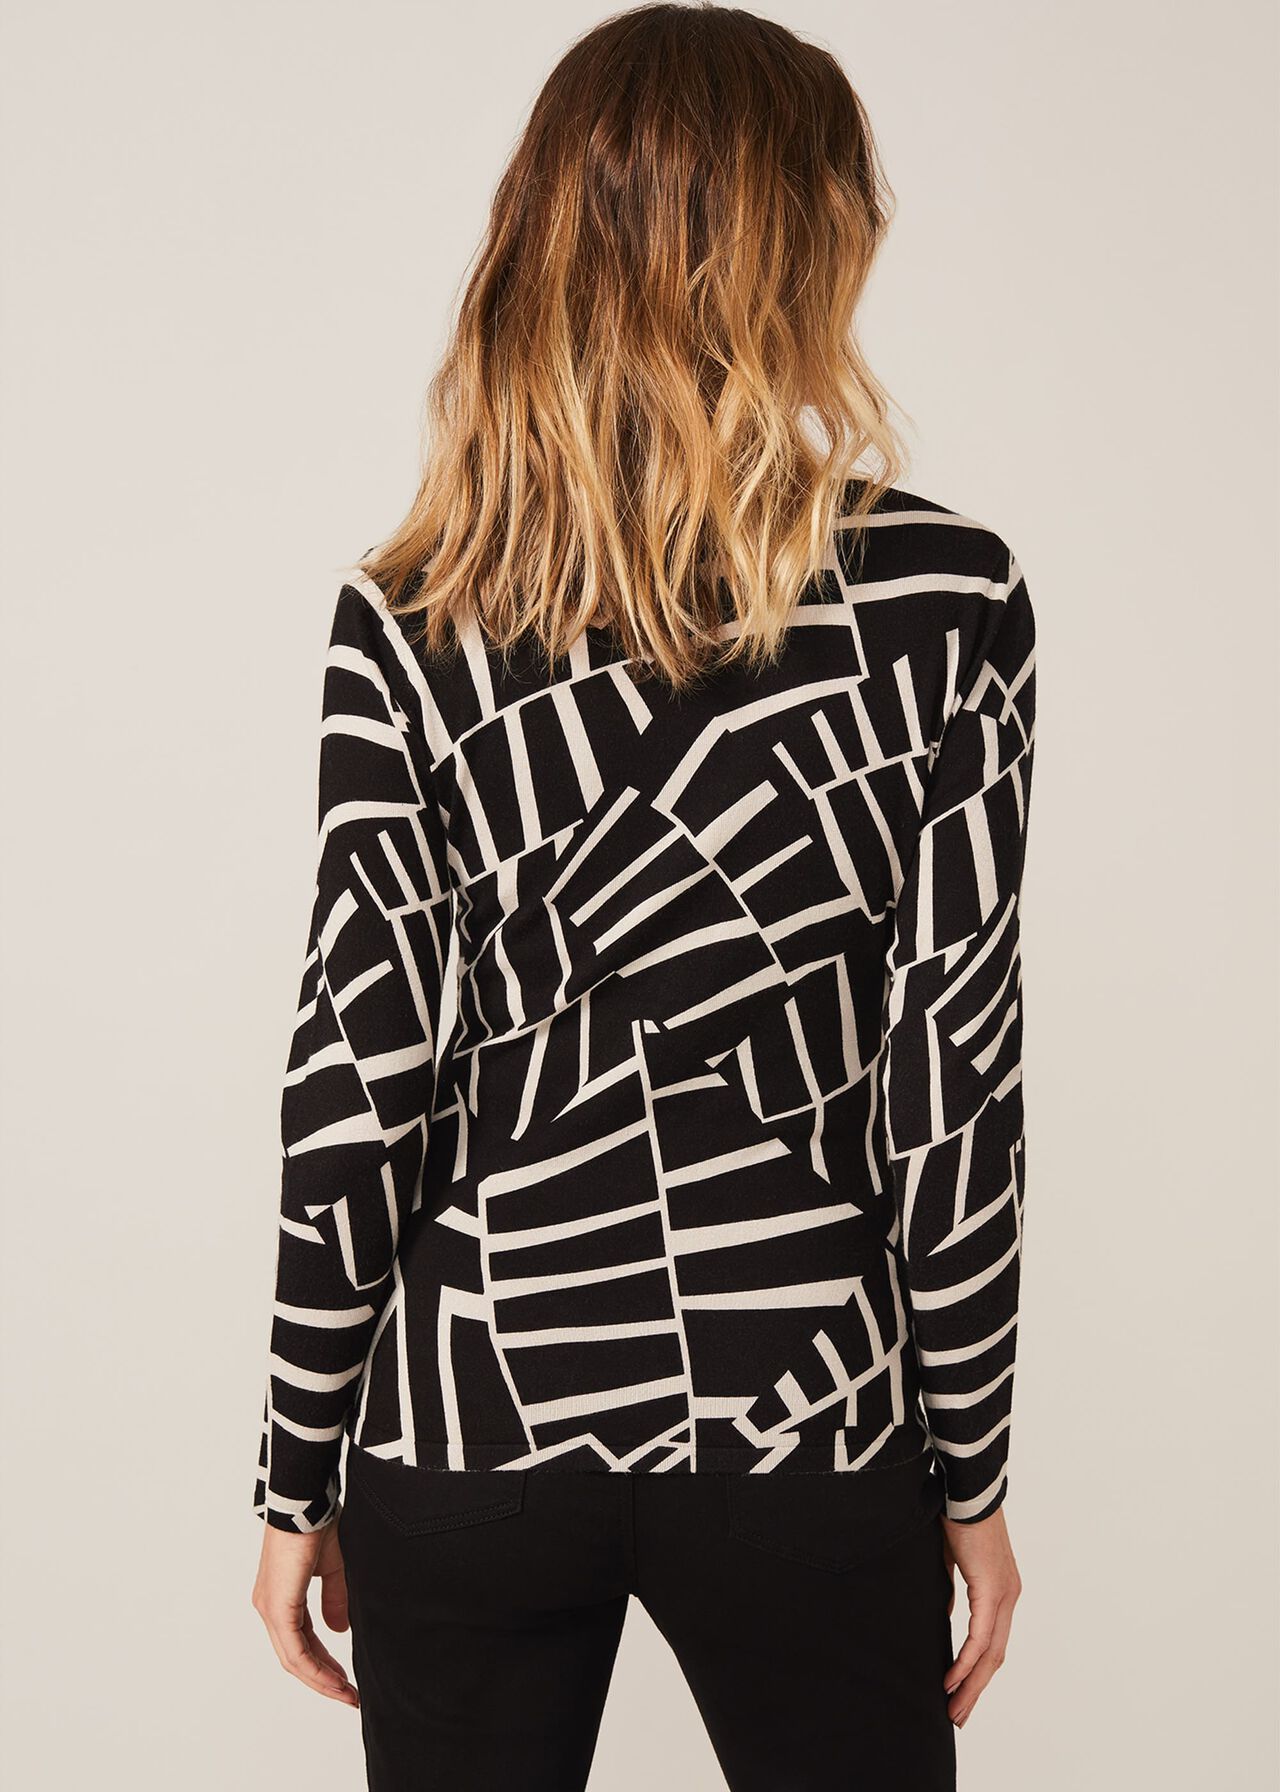 Lotte Abstract Print Knit Top